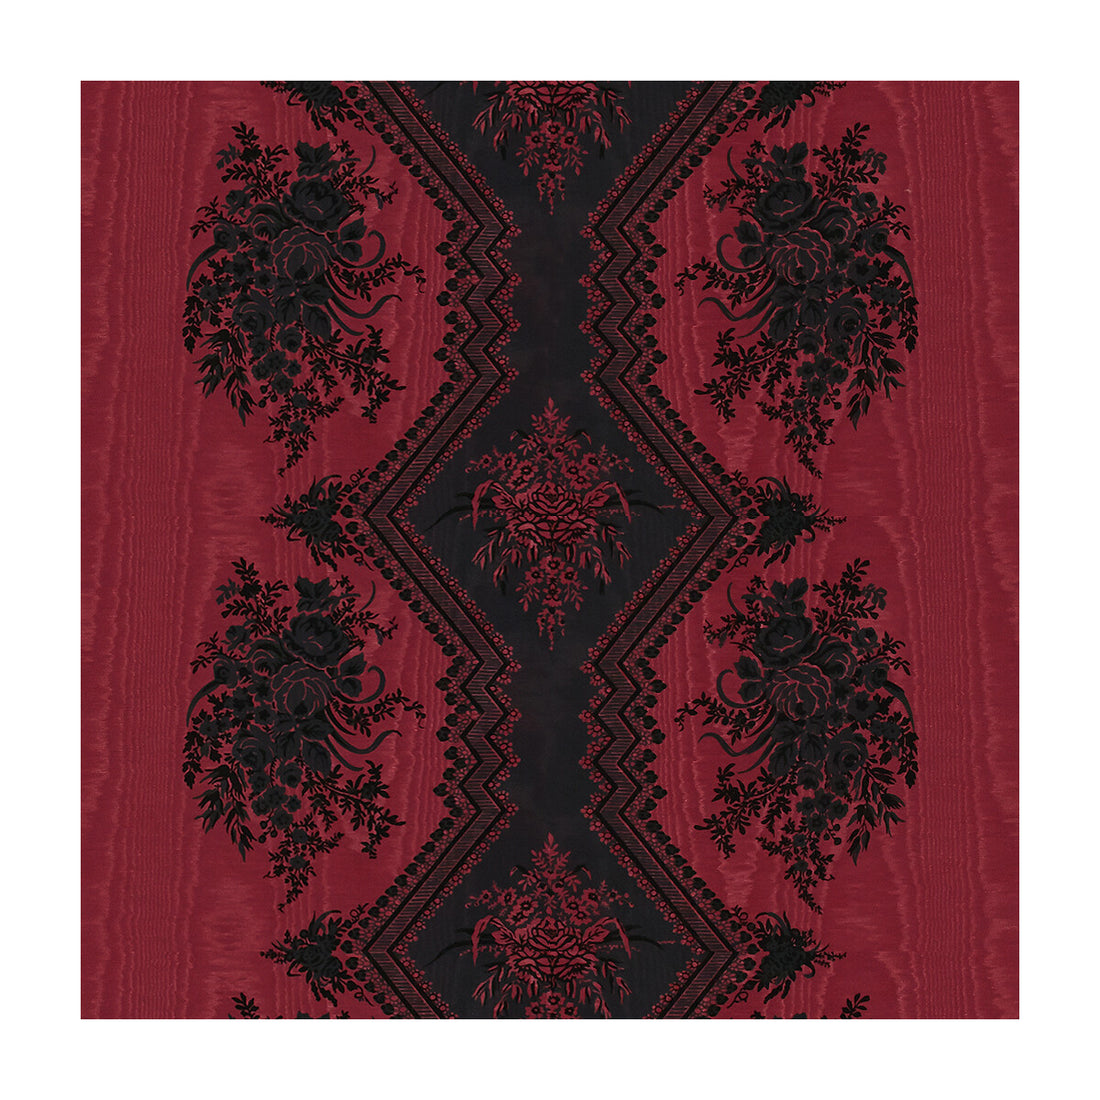 Coppelia Moire fabric in rouge color - pattern 8015137.9.0 - by Brunschwig &amp; Fils in the Madeleine Castaing collection